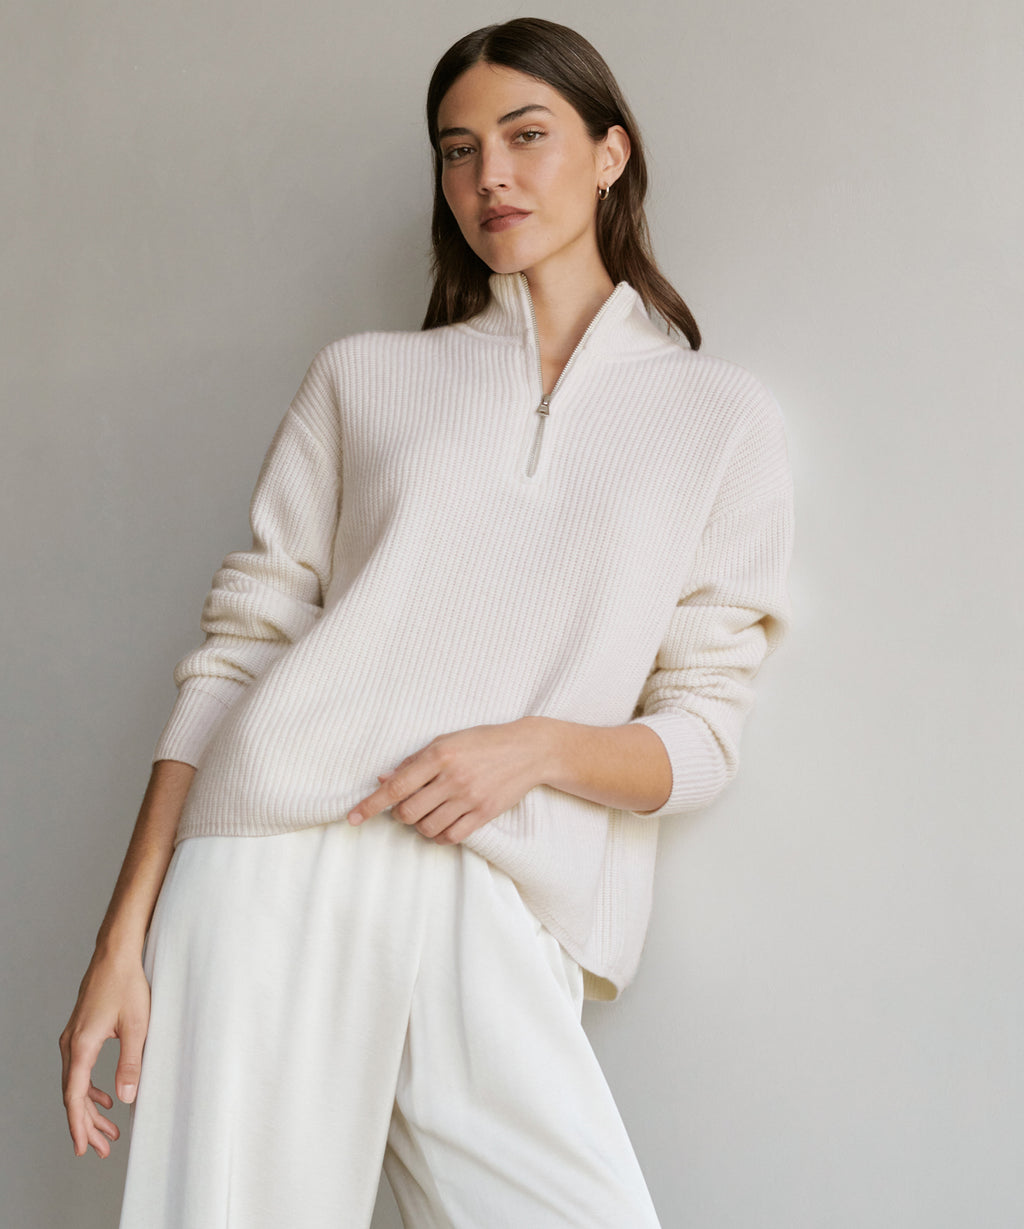 Cotton Cashmere Tee Time Half Zip Pullover